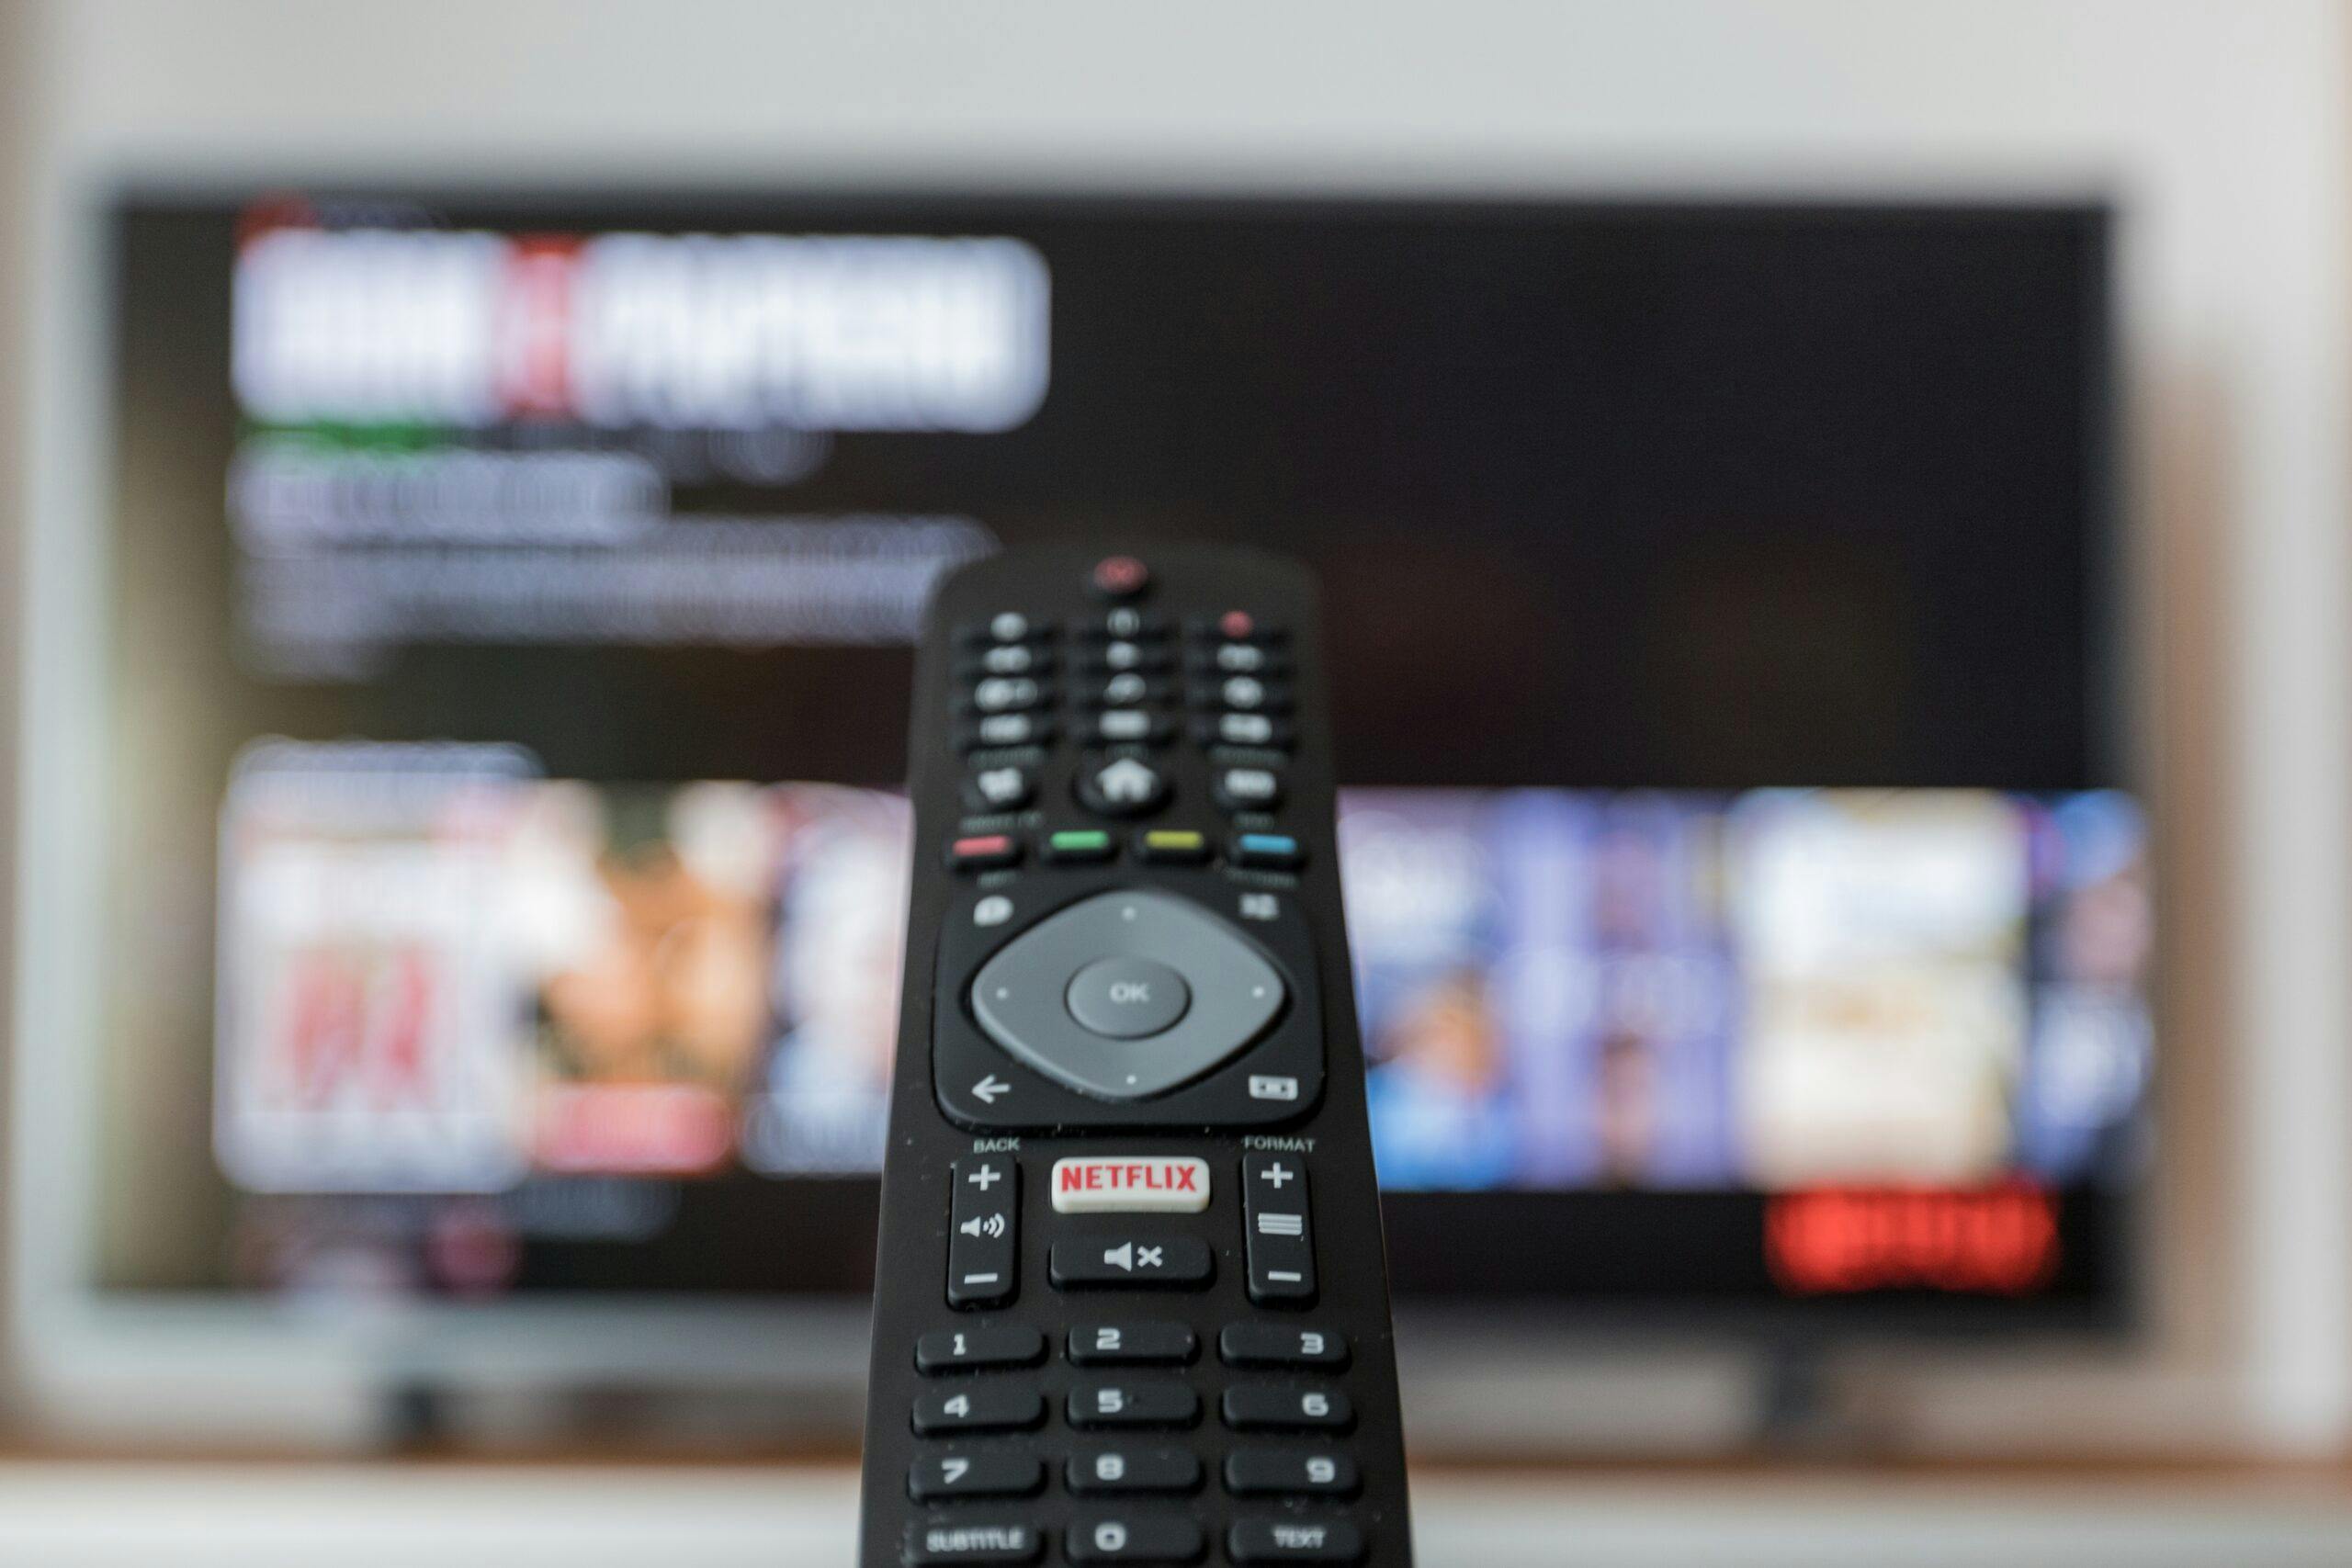 A remote pointing to a TV that is showing Netflix